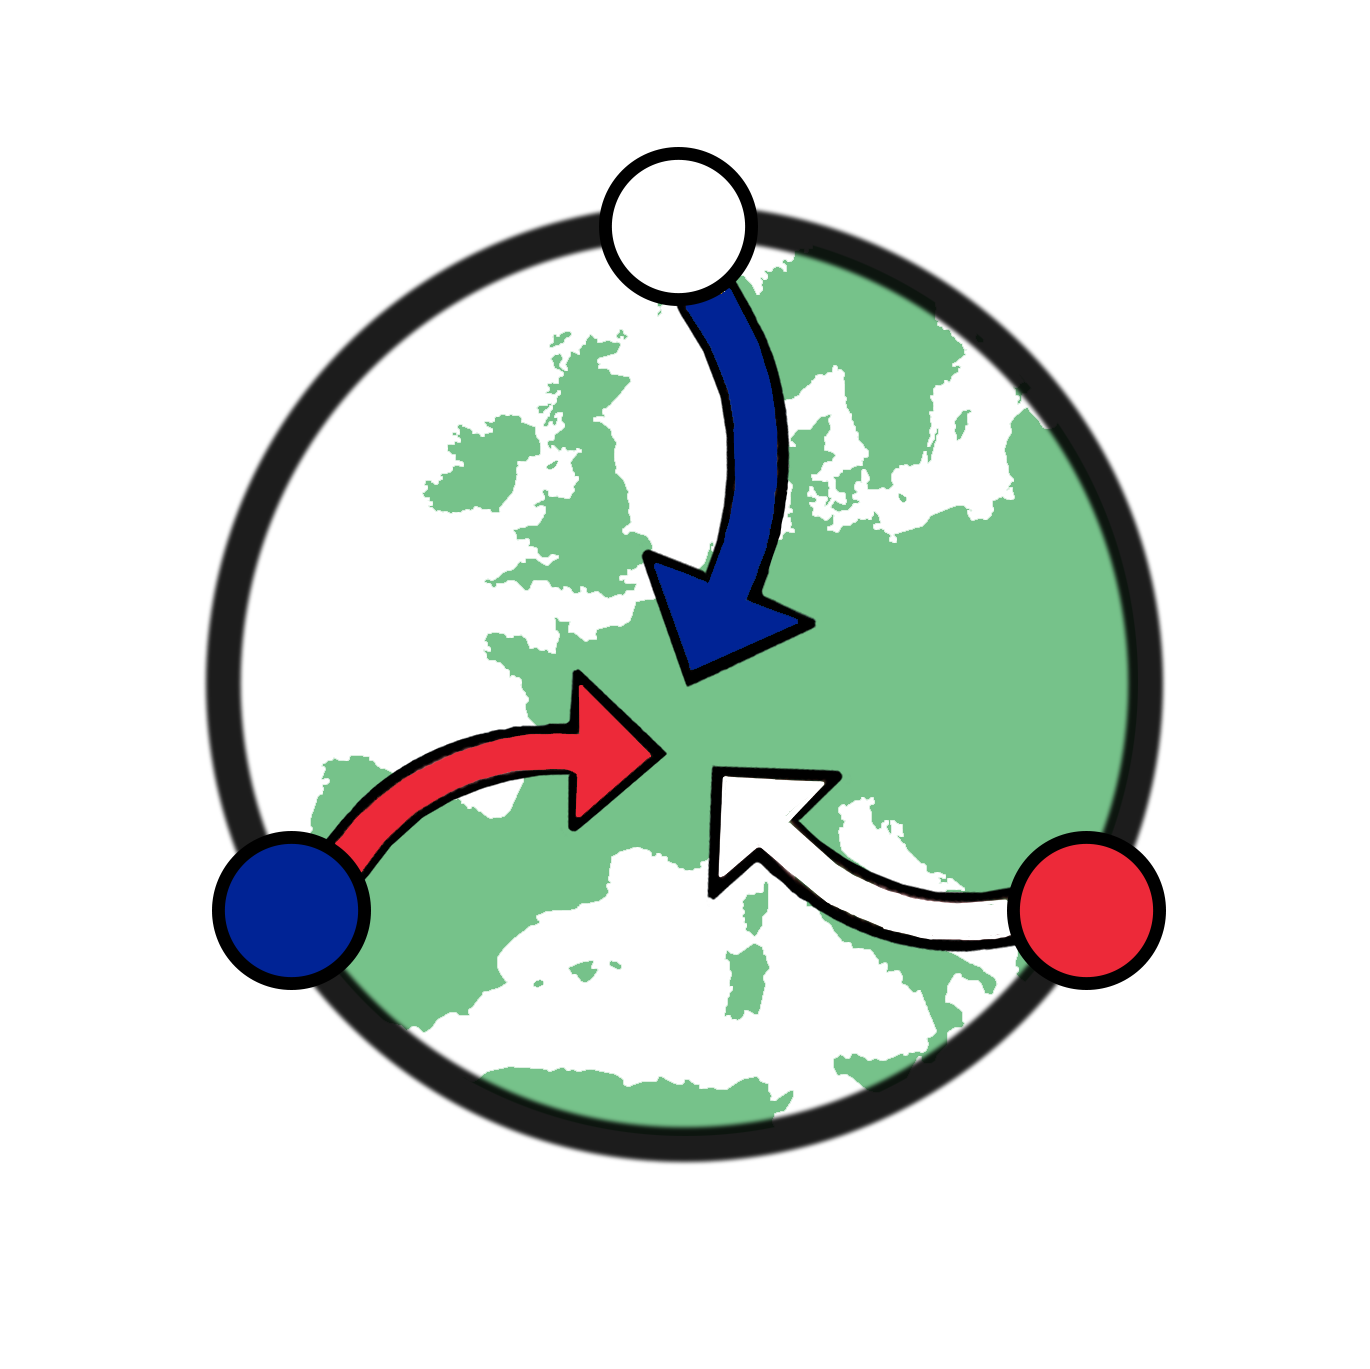 Winter Workshop on Complex Systems 2022